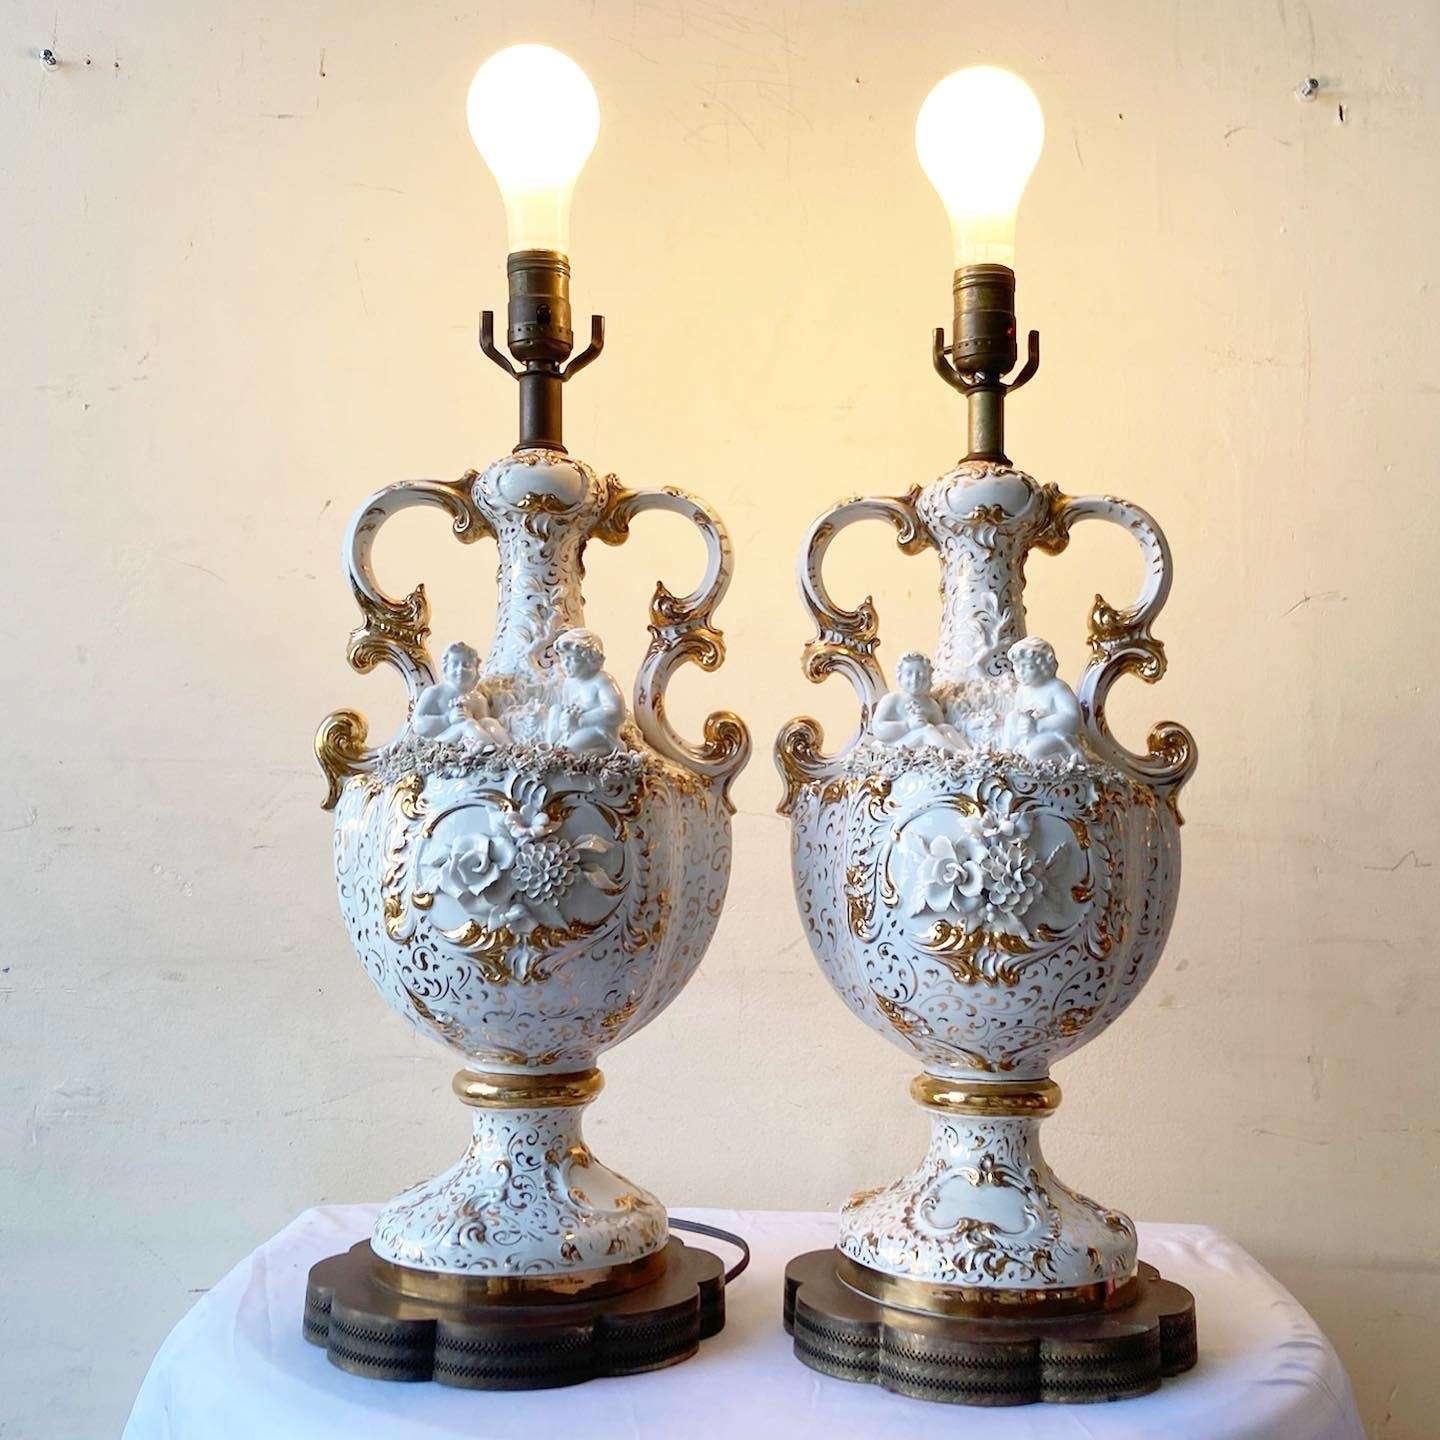 Vintage Ceramic White and Gold Cherub Trophy Table Lamps - a Pair In Good Condition For Sale In Delray Beach, FL